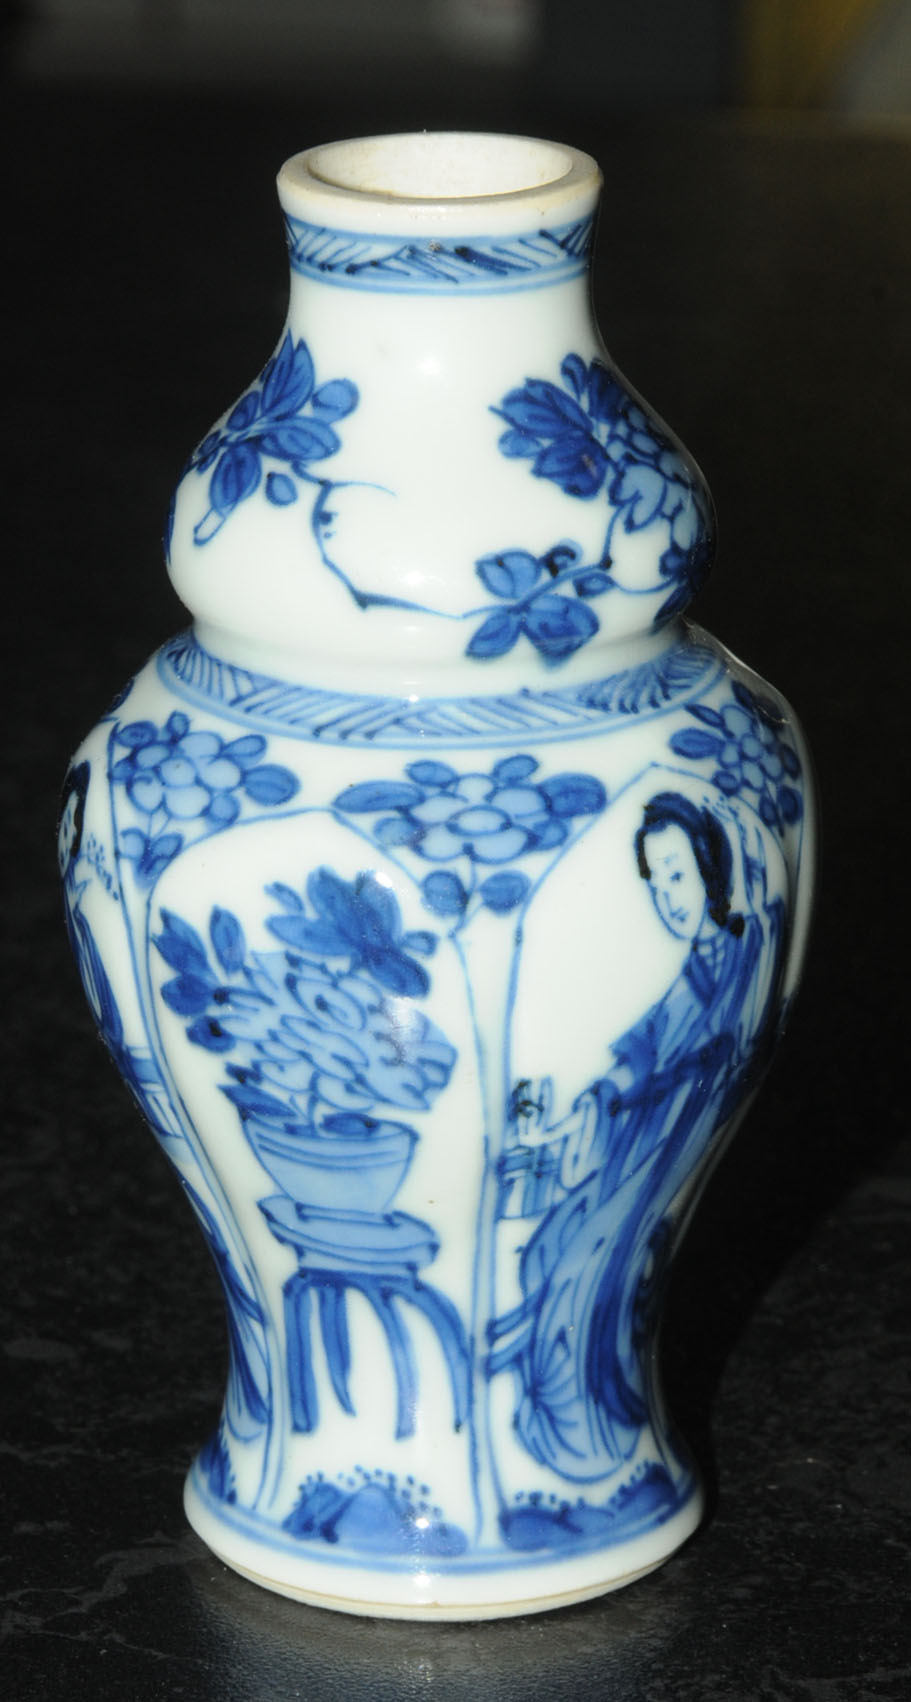 An early 20th century Chinese blue and white porcelain miniature baluster vase with lobbed sides, - Image 3 of 7